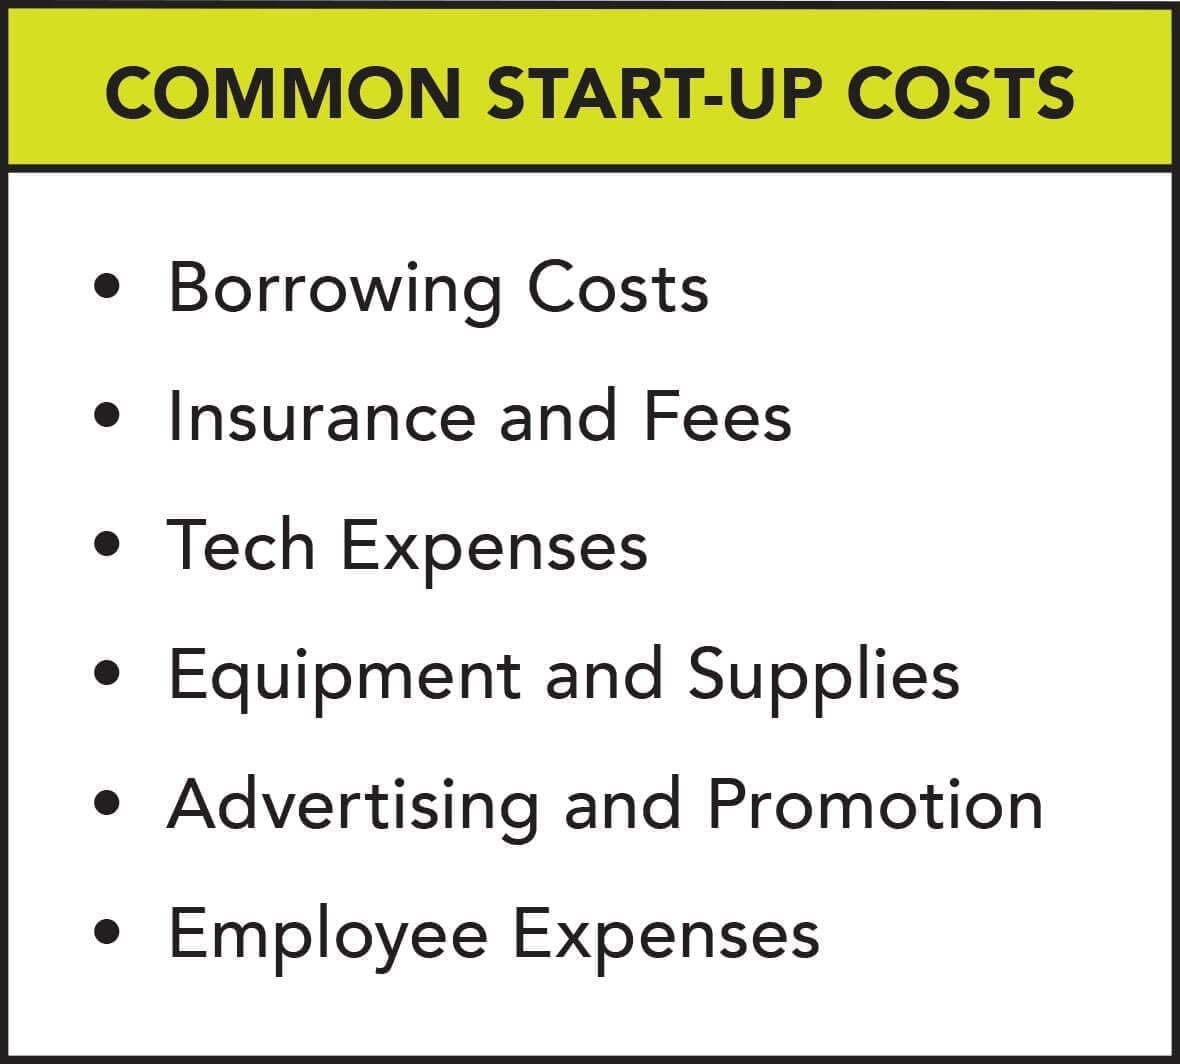 Common start-up costs include borrowing costs, insurance and fees, tech expenses, equipment and supplies, advertising and promotion, and employee expenses.